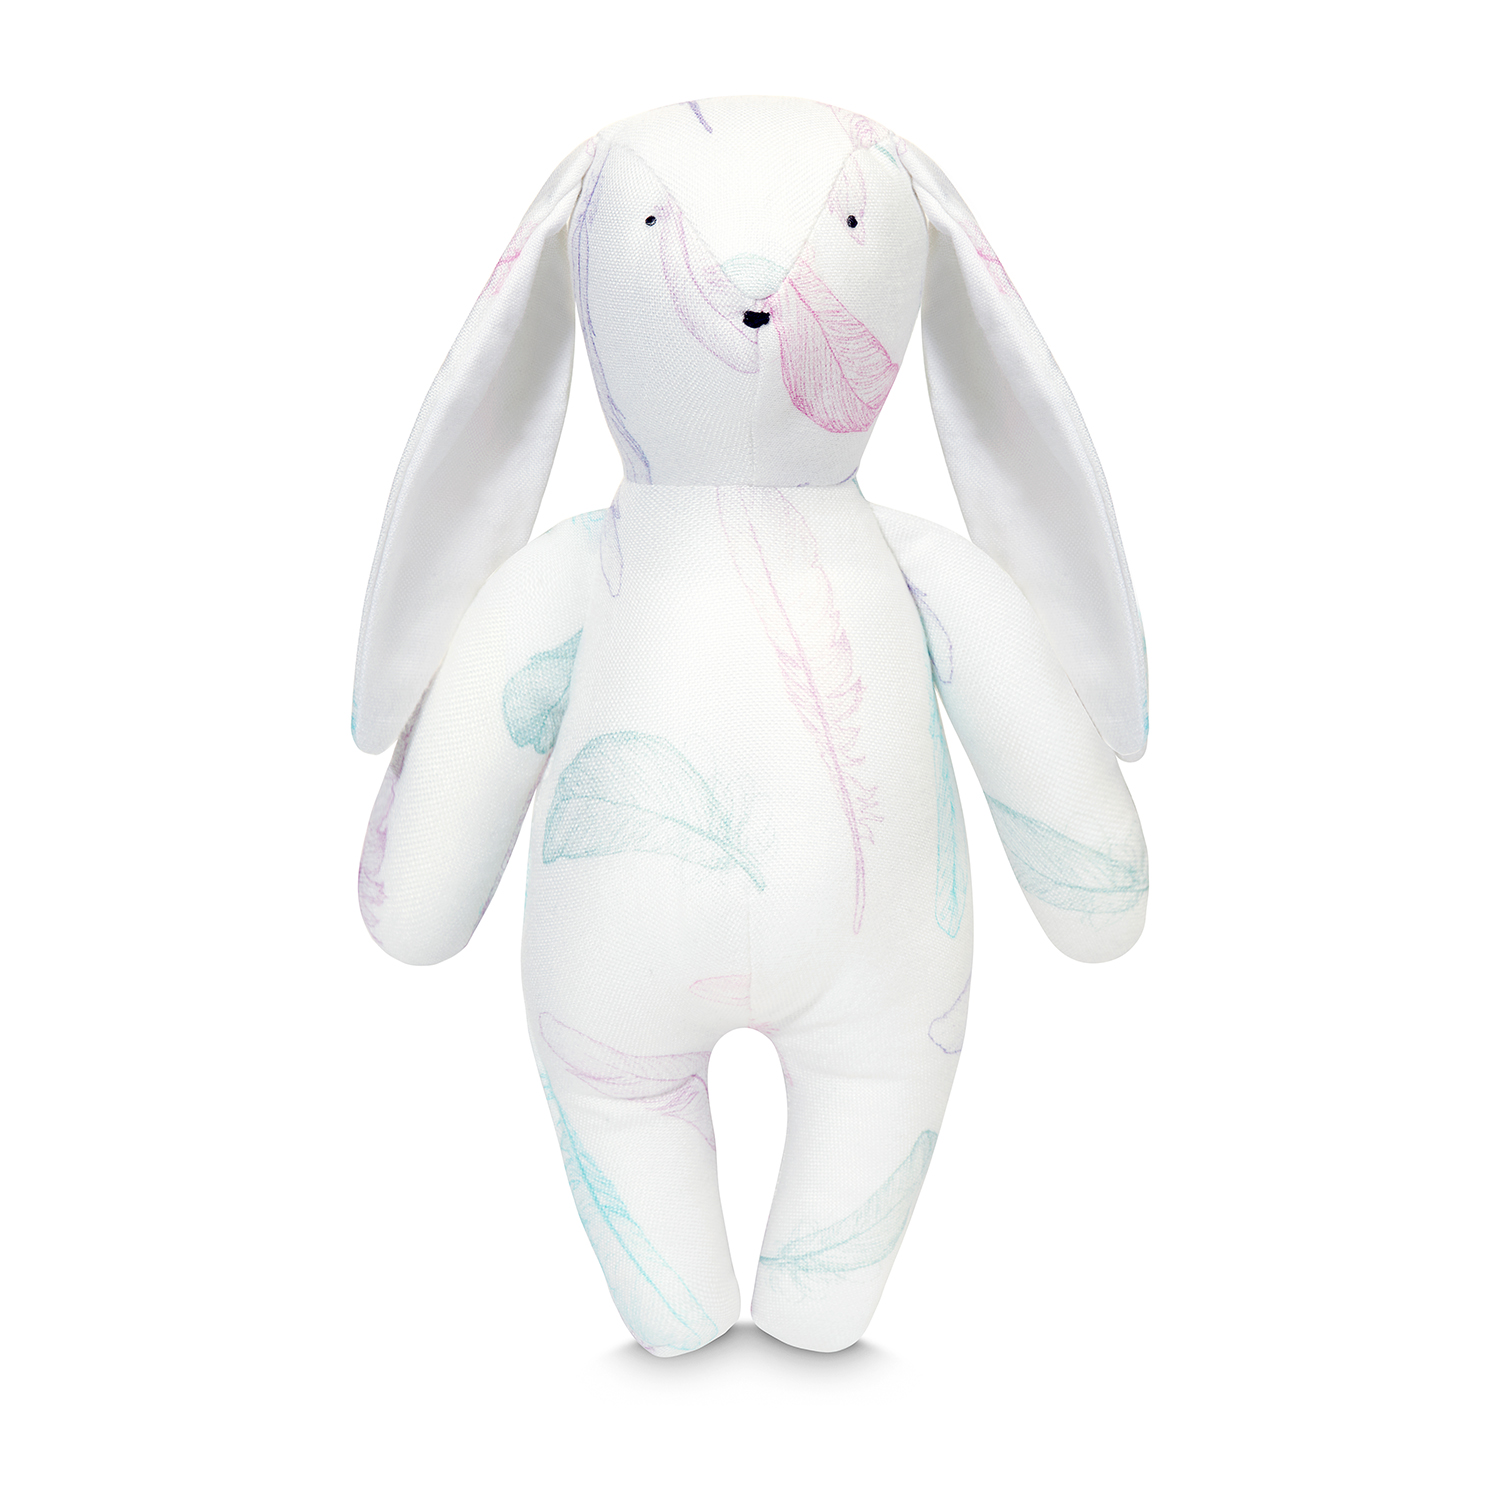 Bunio bunny soft toy - Paradise feathers